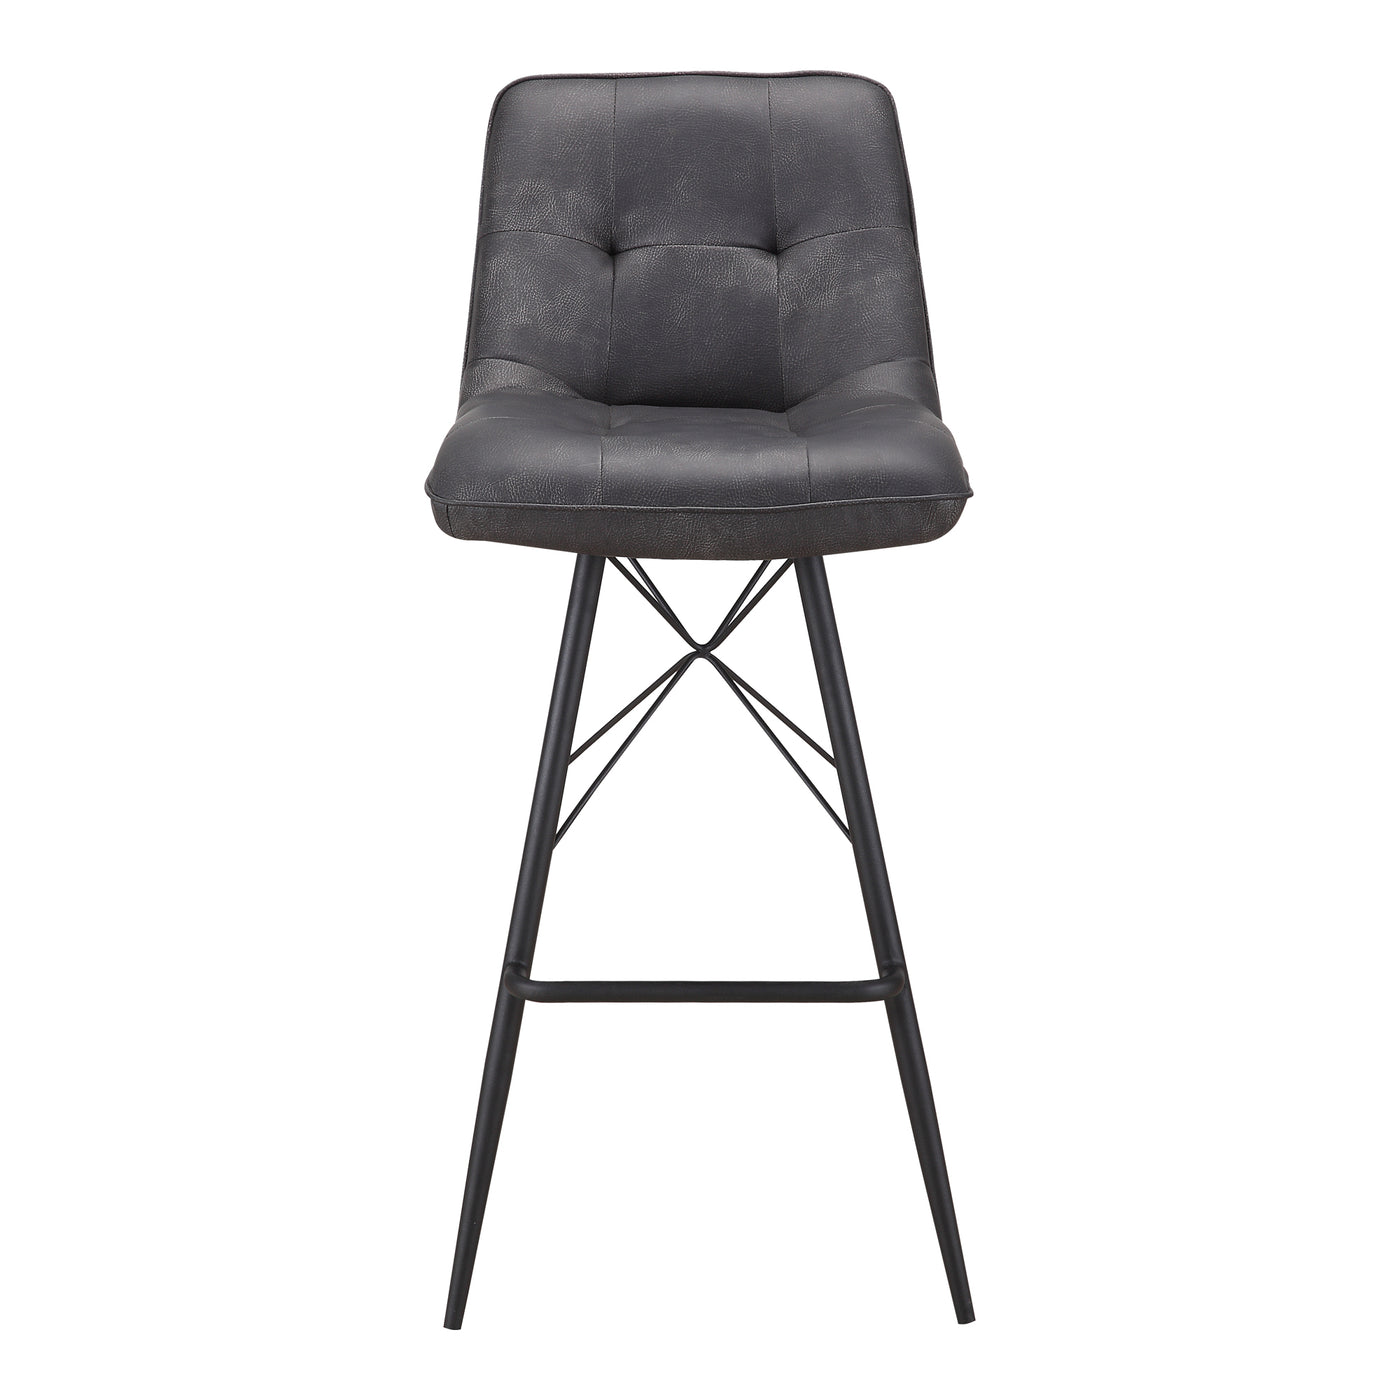 The Morrison is a sleek bar stool design, with a comfortable padded seat for long dinners with family and friends, easy-ca...